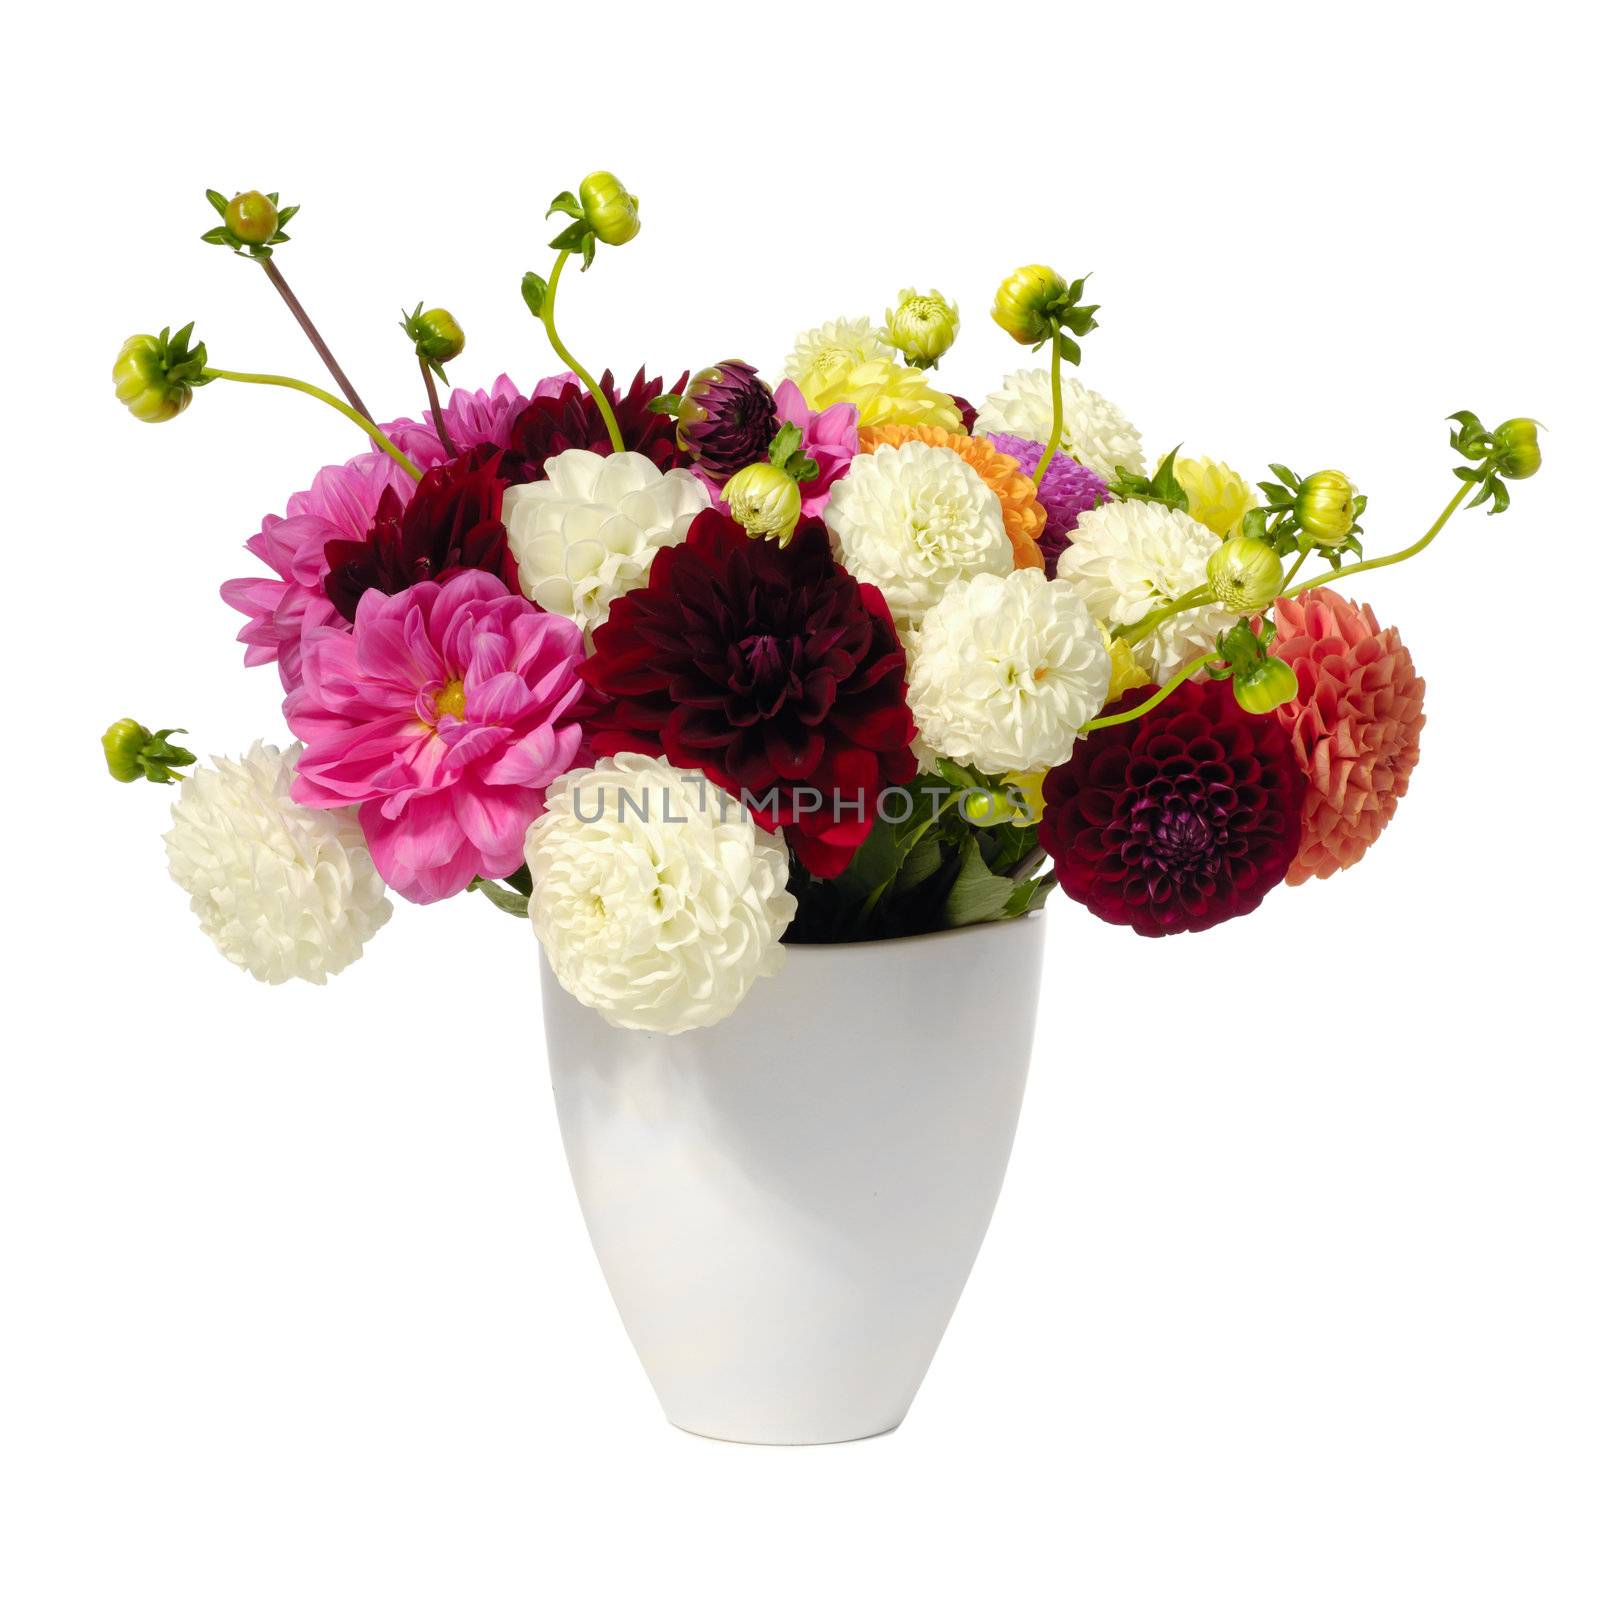 Bouquet of mixed flowers in vase taken on a white background